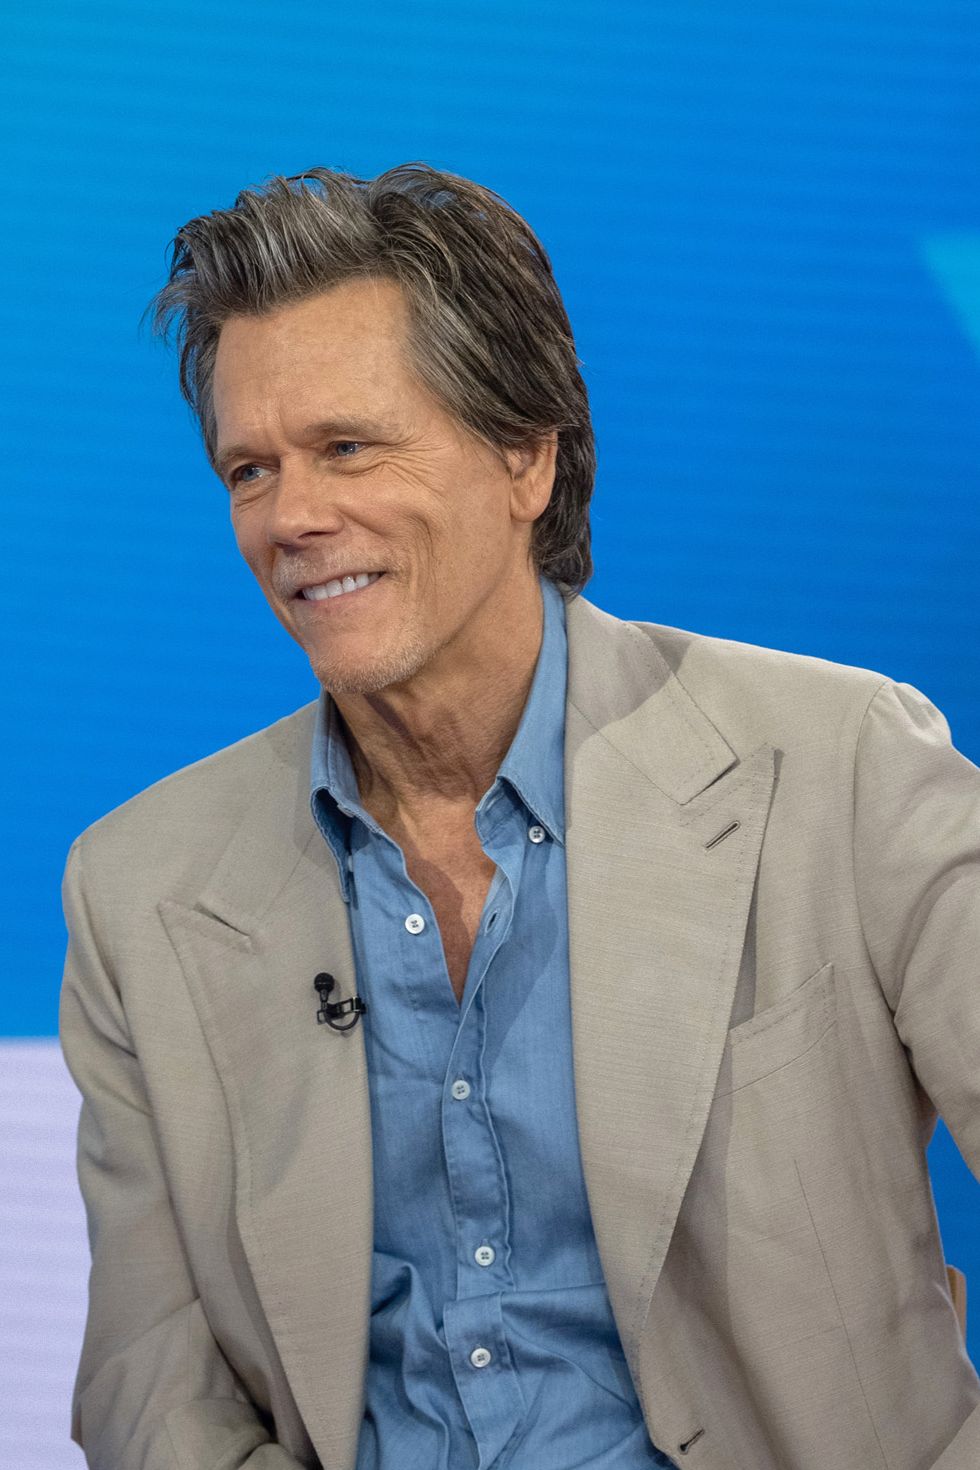 Kevin Bacon on the Today Show on Thursday, August 4, 2022